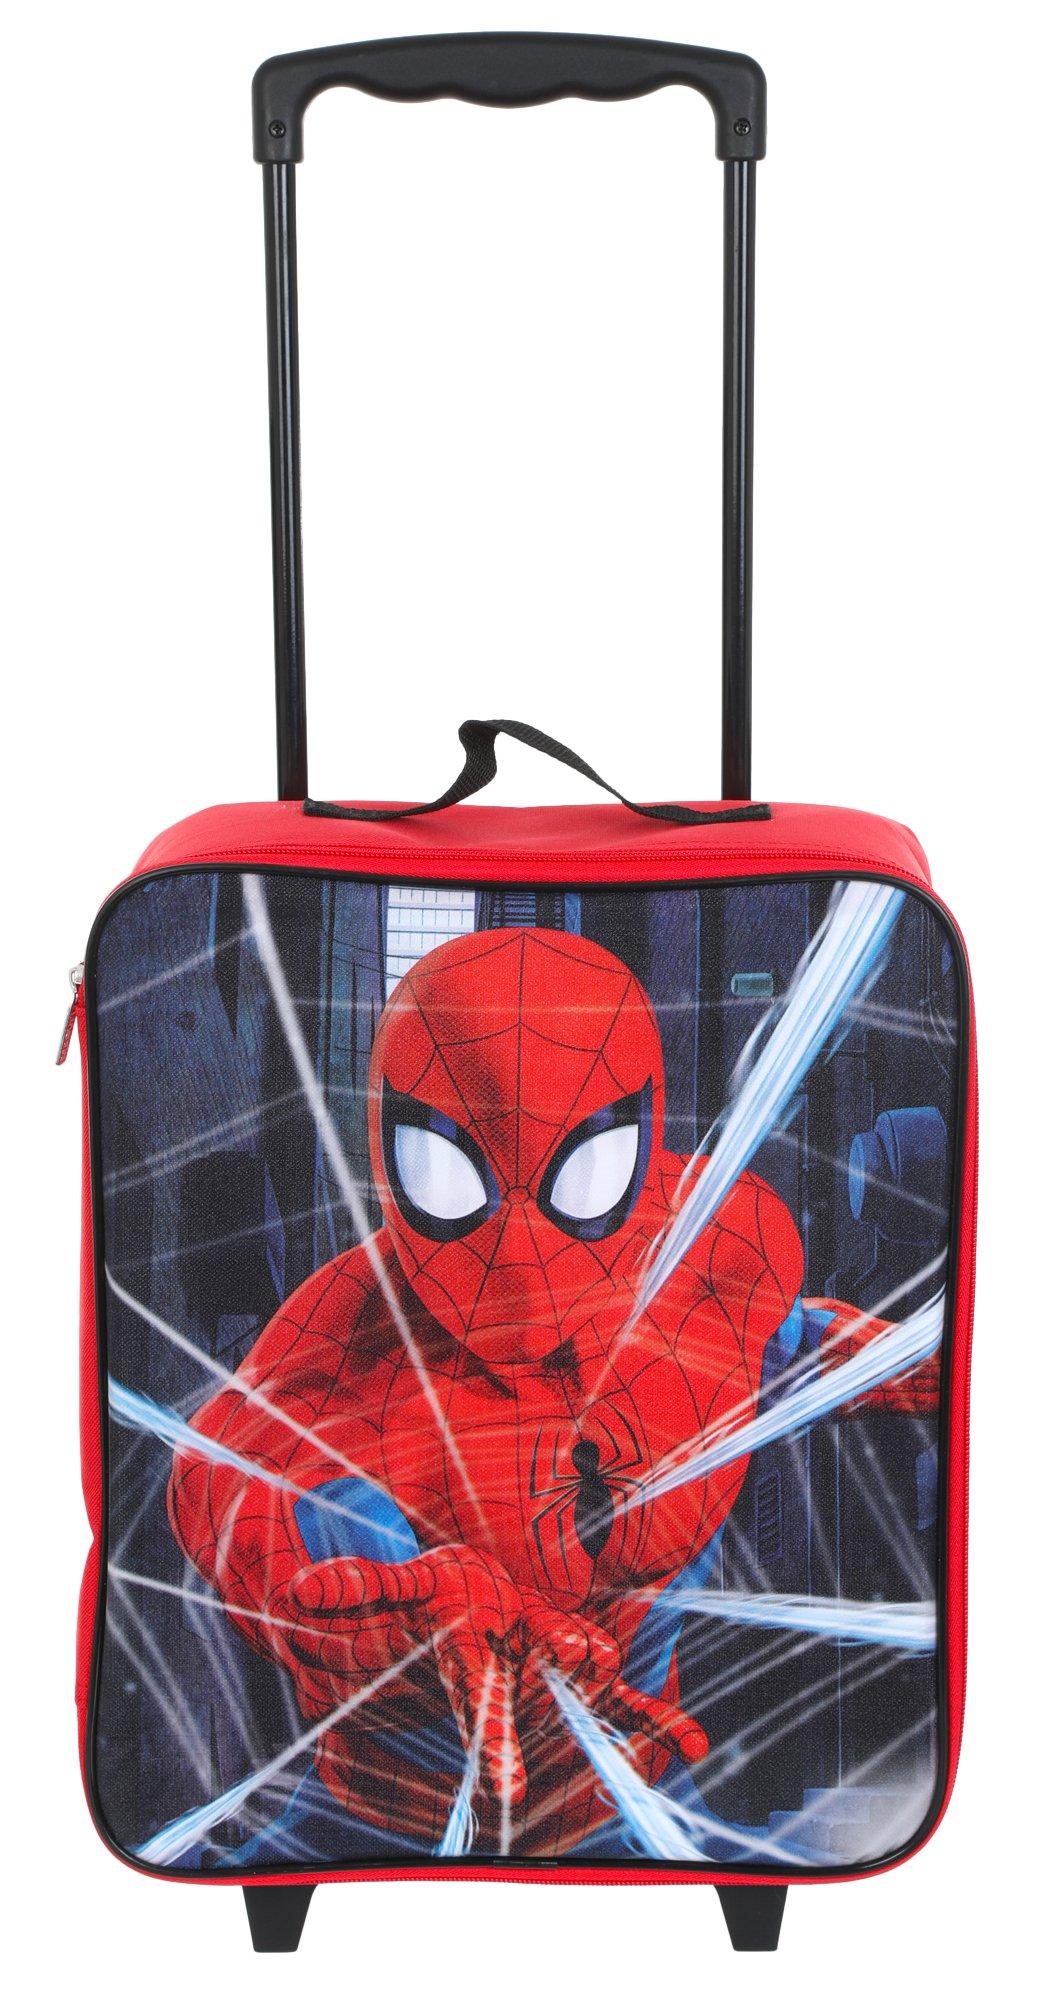 17in Spiderman Rolling Luggage